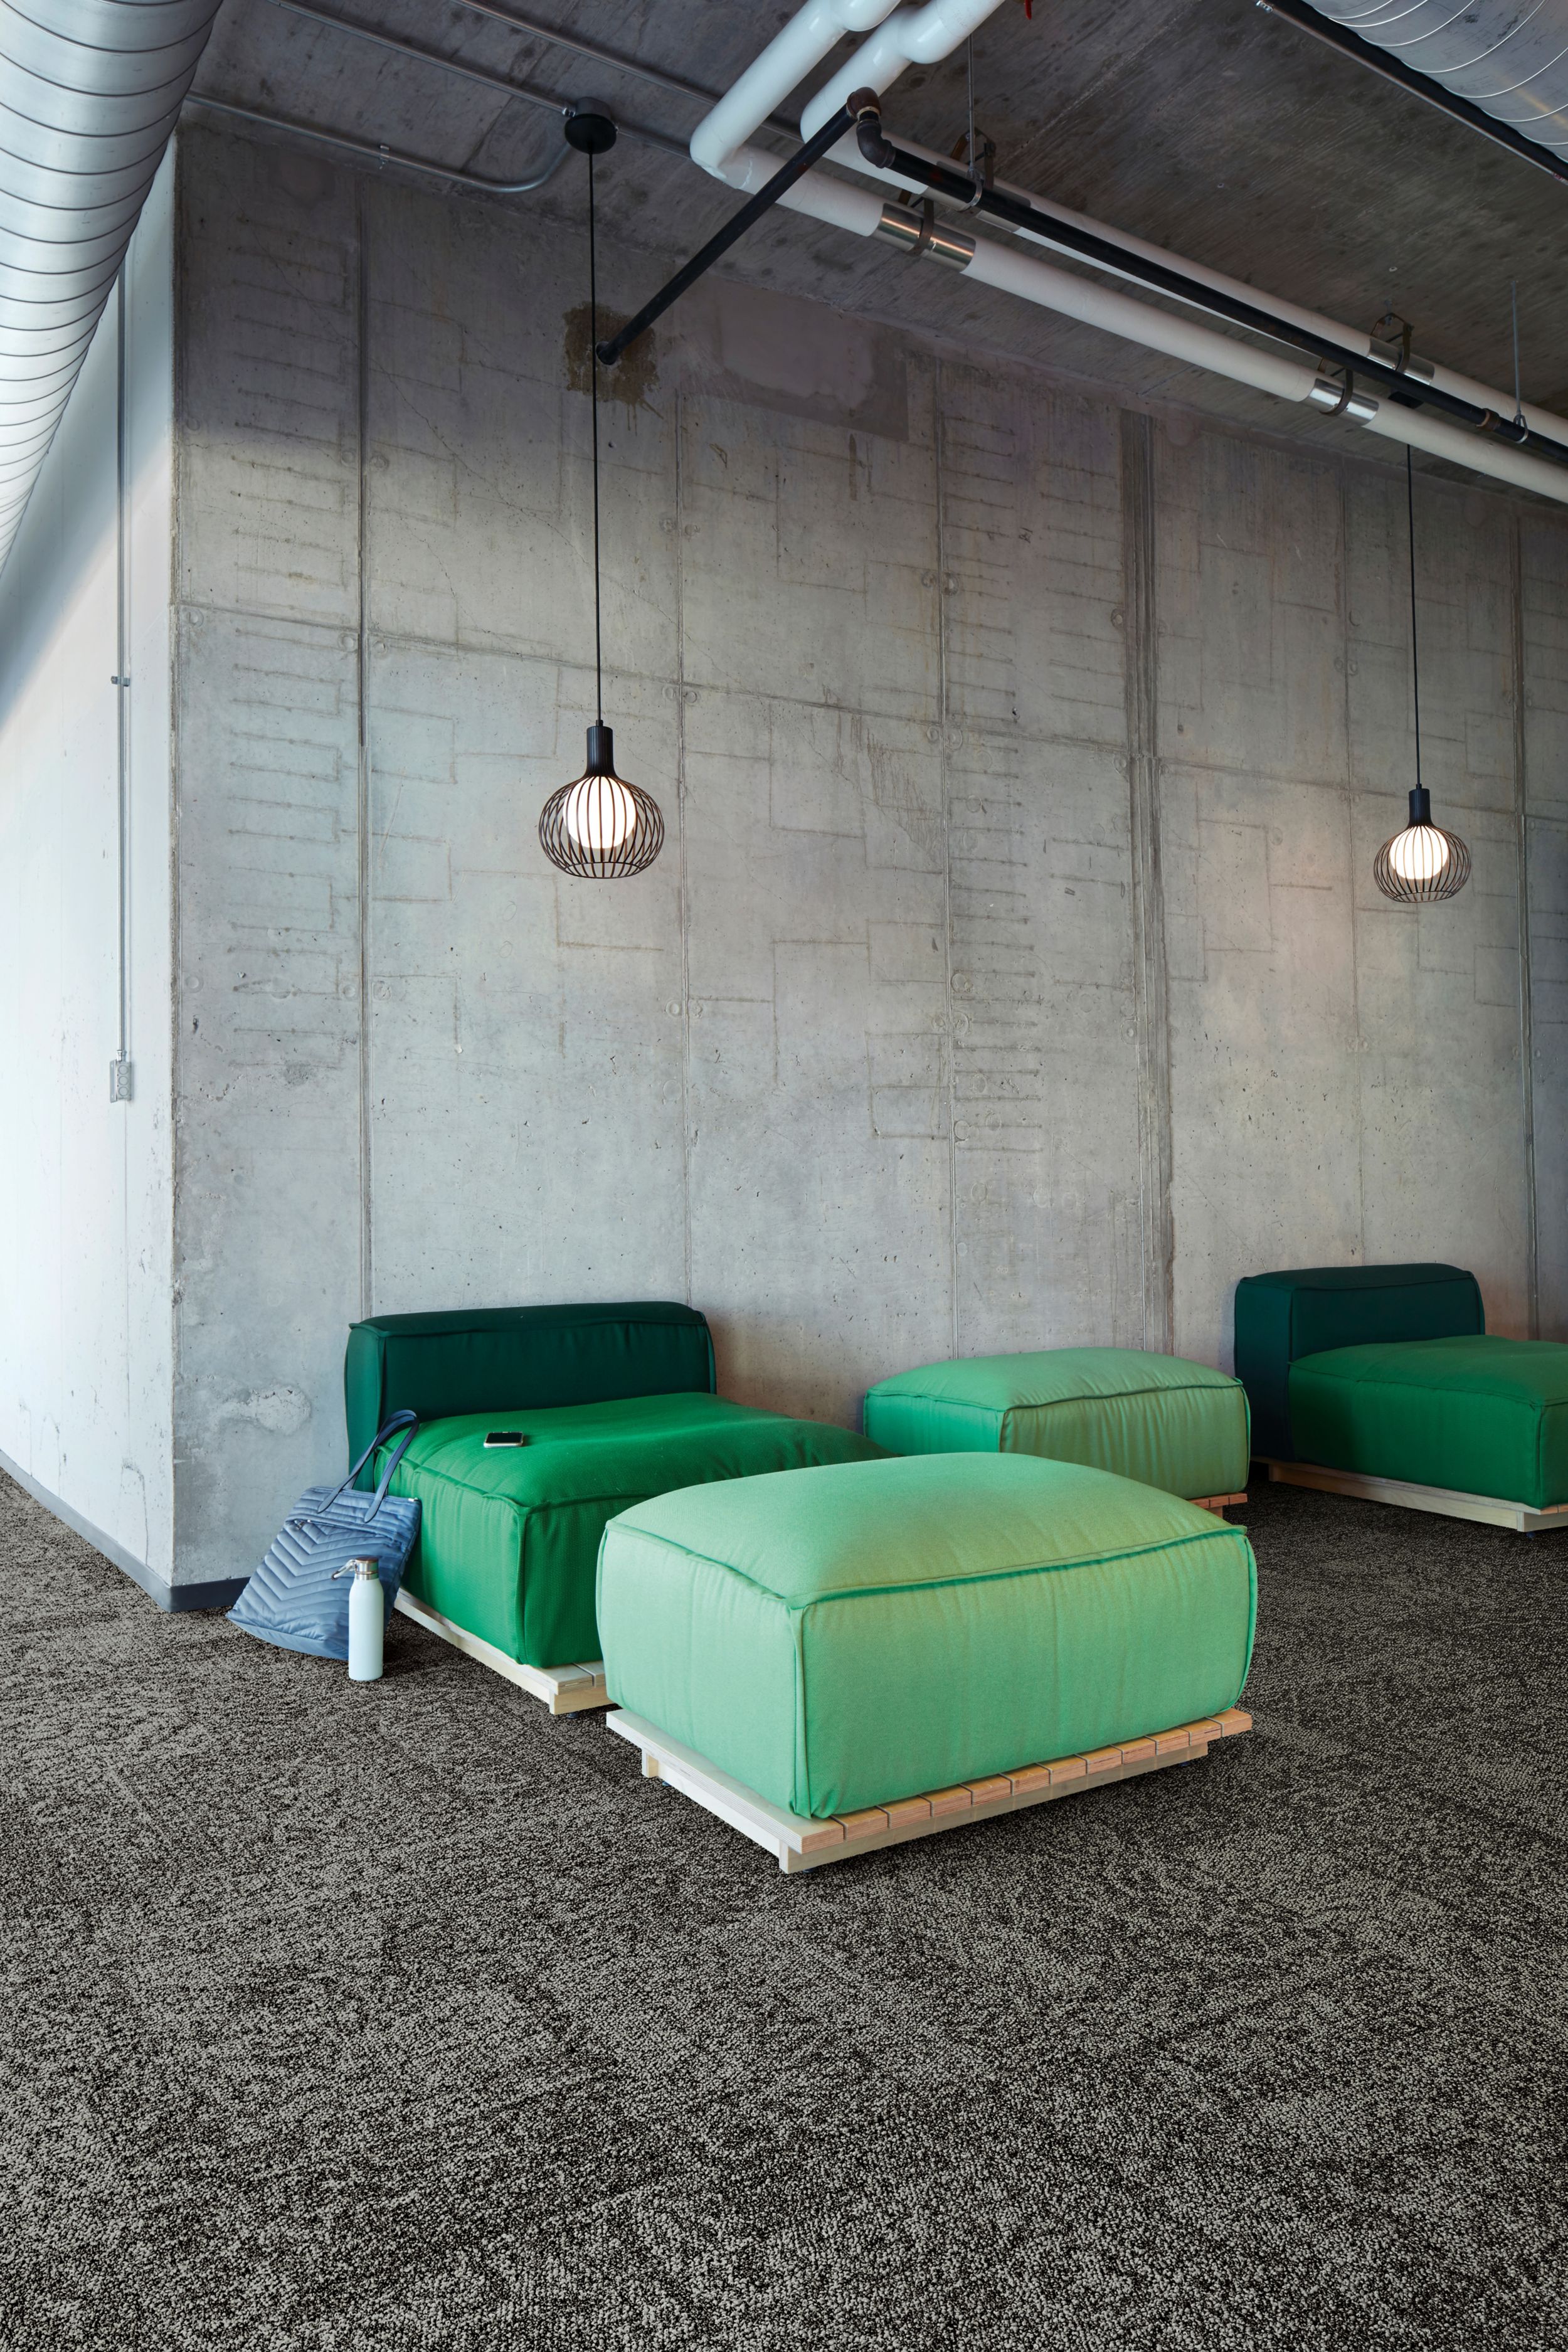 Interface Open Air 405 carpet tile with cement wall and green puffy chairs and ottomans número de imagen 1